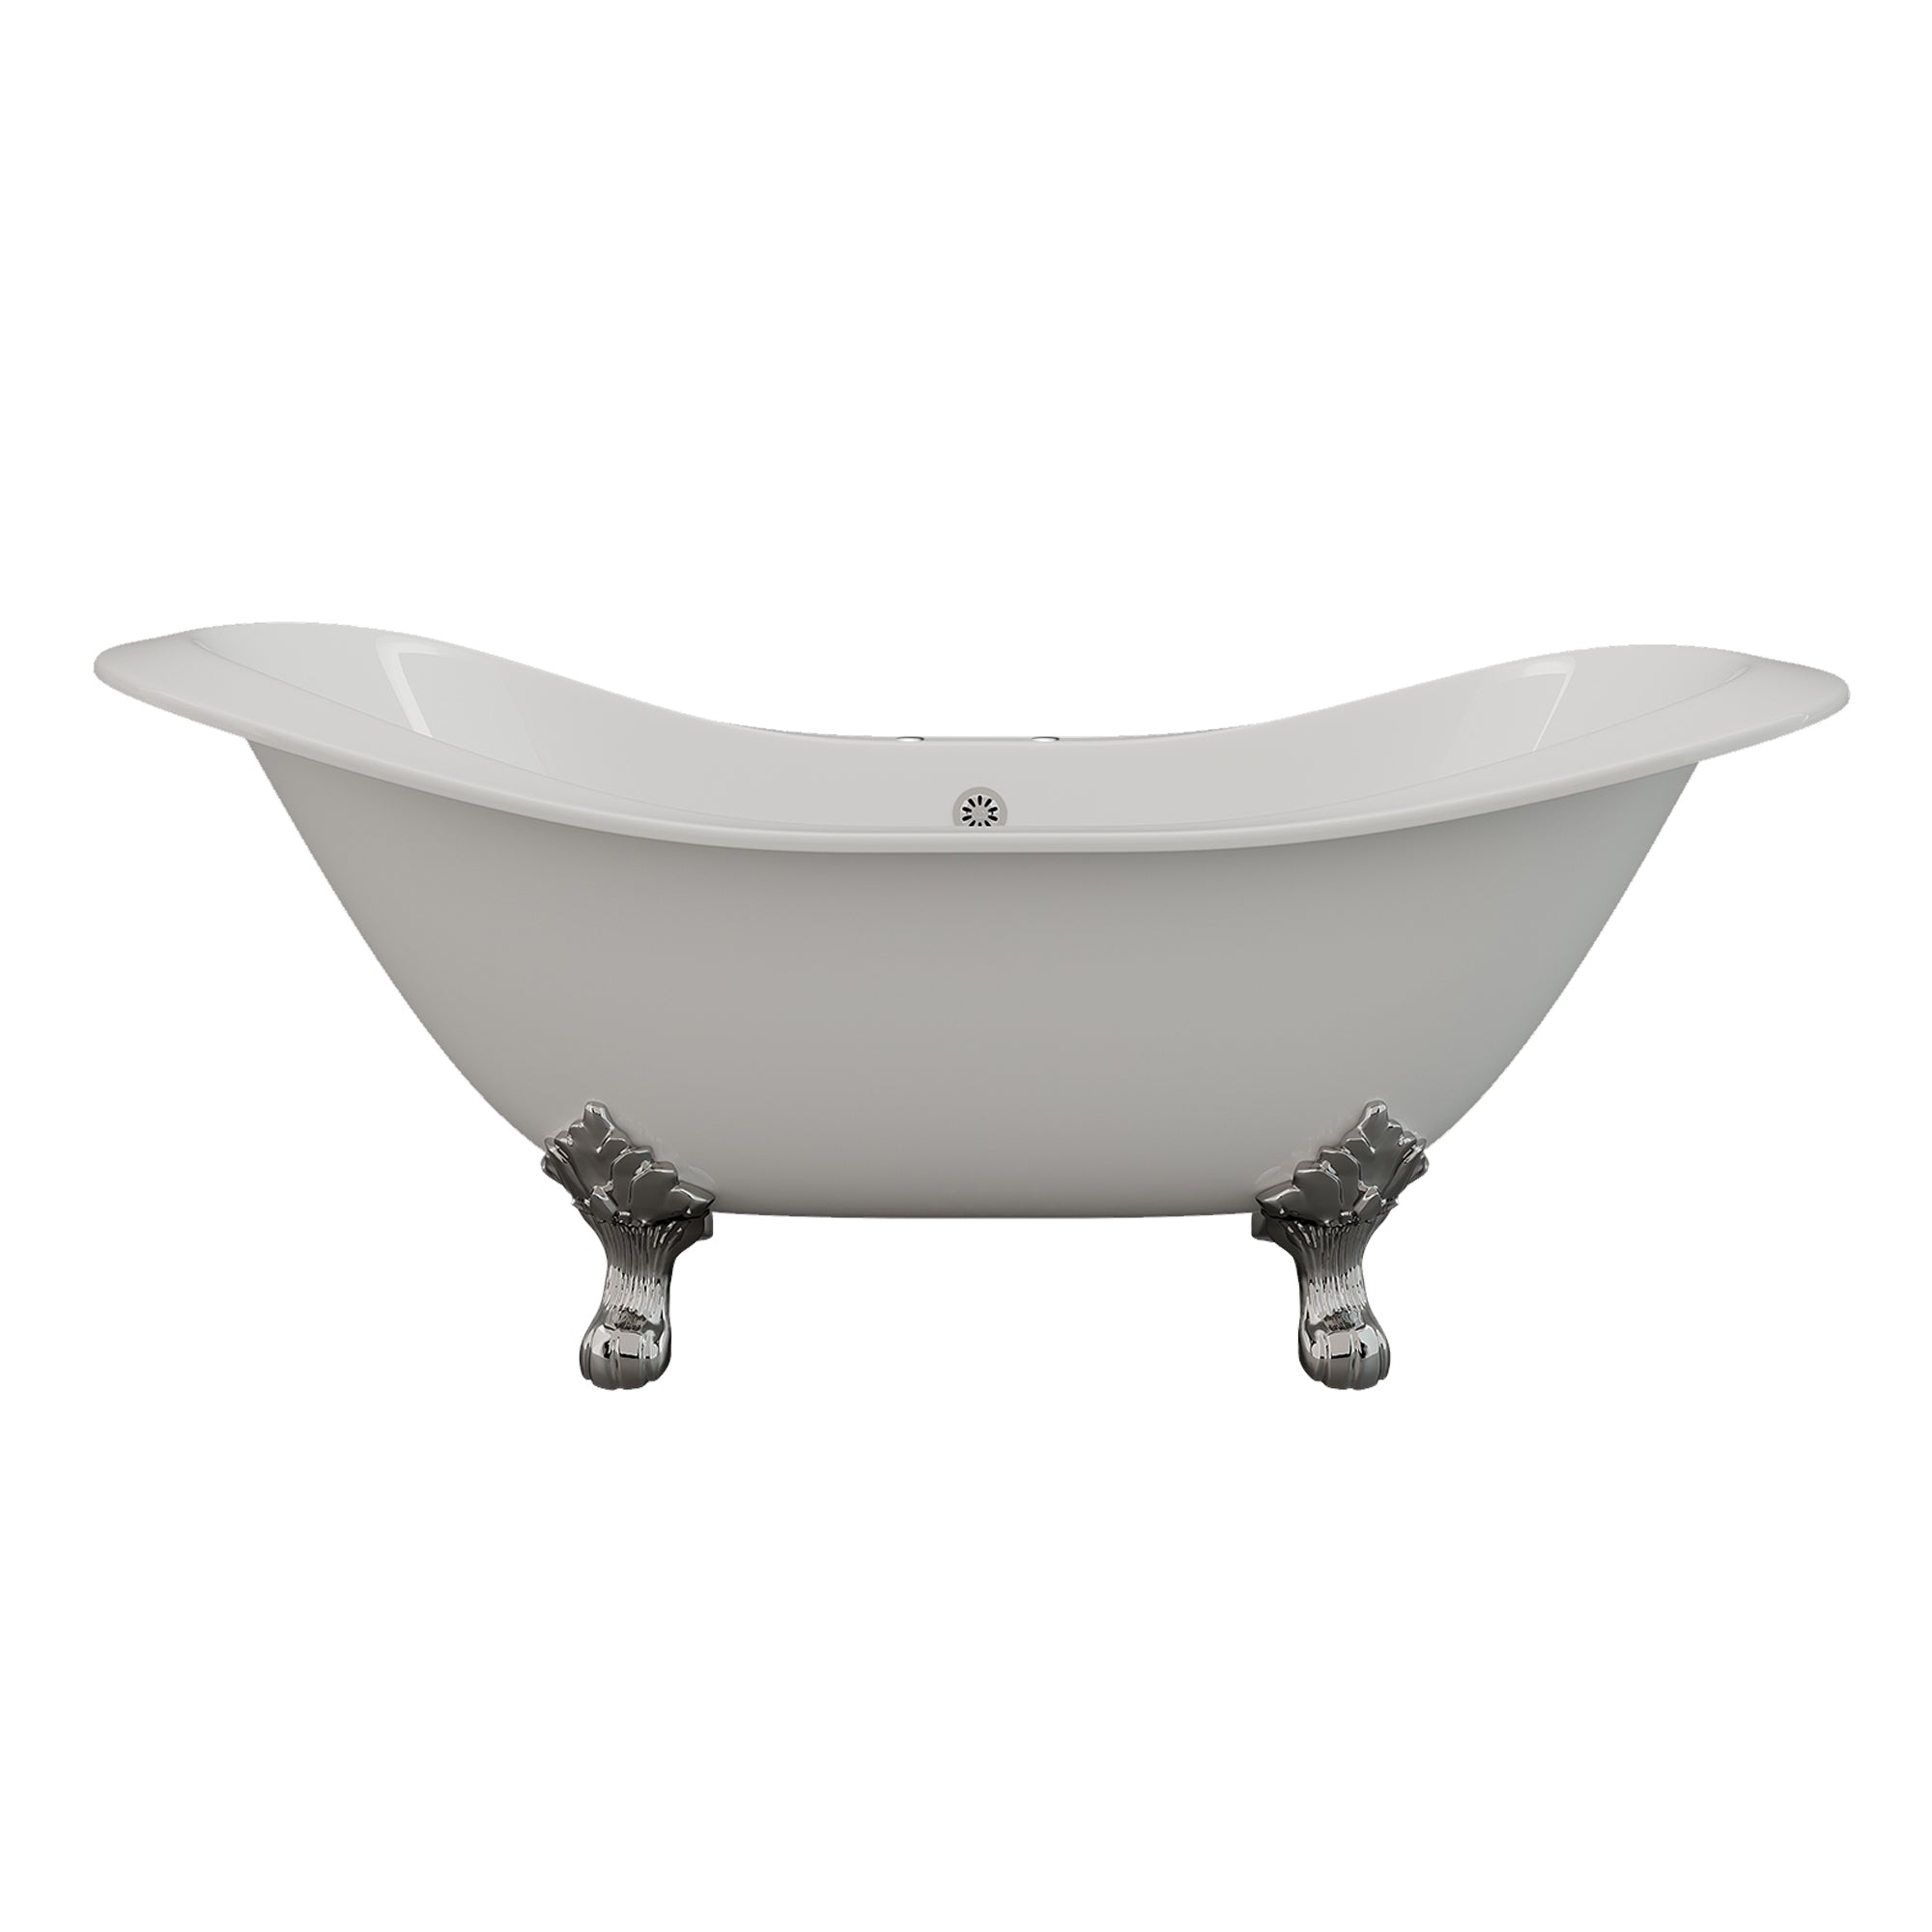 Cambridge Plumbing 72" X 31" Double Ended Cast Iron Slipper Tub (Porcelain enamel interior and white paint exterior) with 7" Deck Mount Faucet Drillings and Feet (Brushed nickel) DES-DH - Vital Hydrotherapy